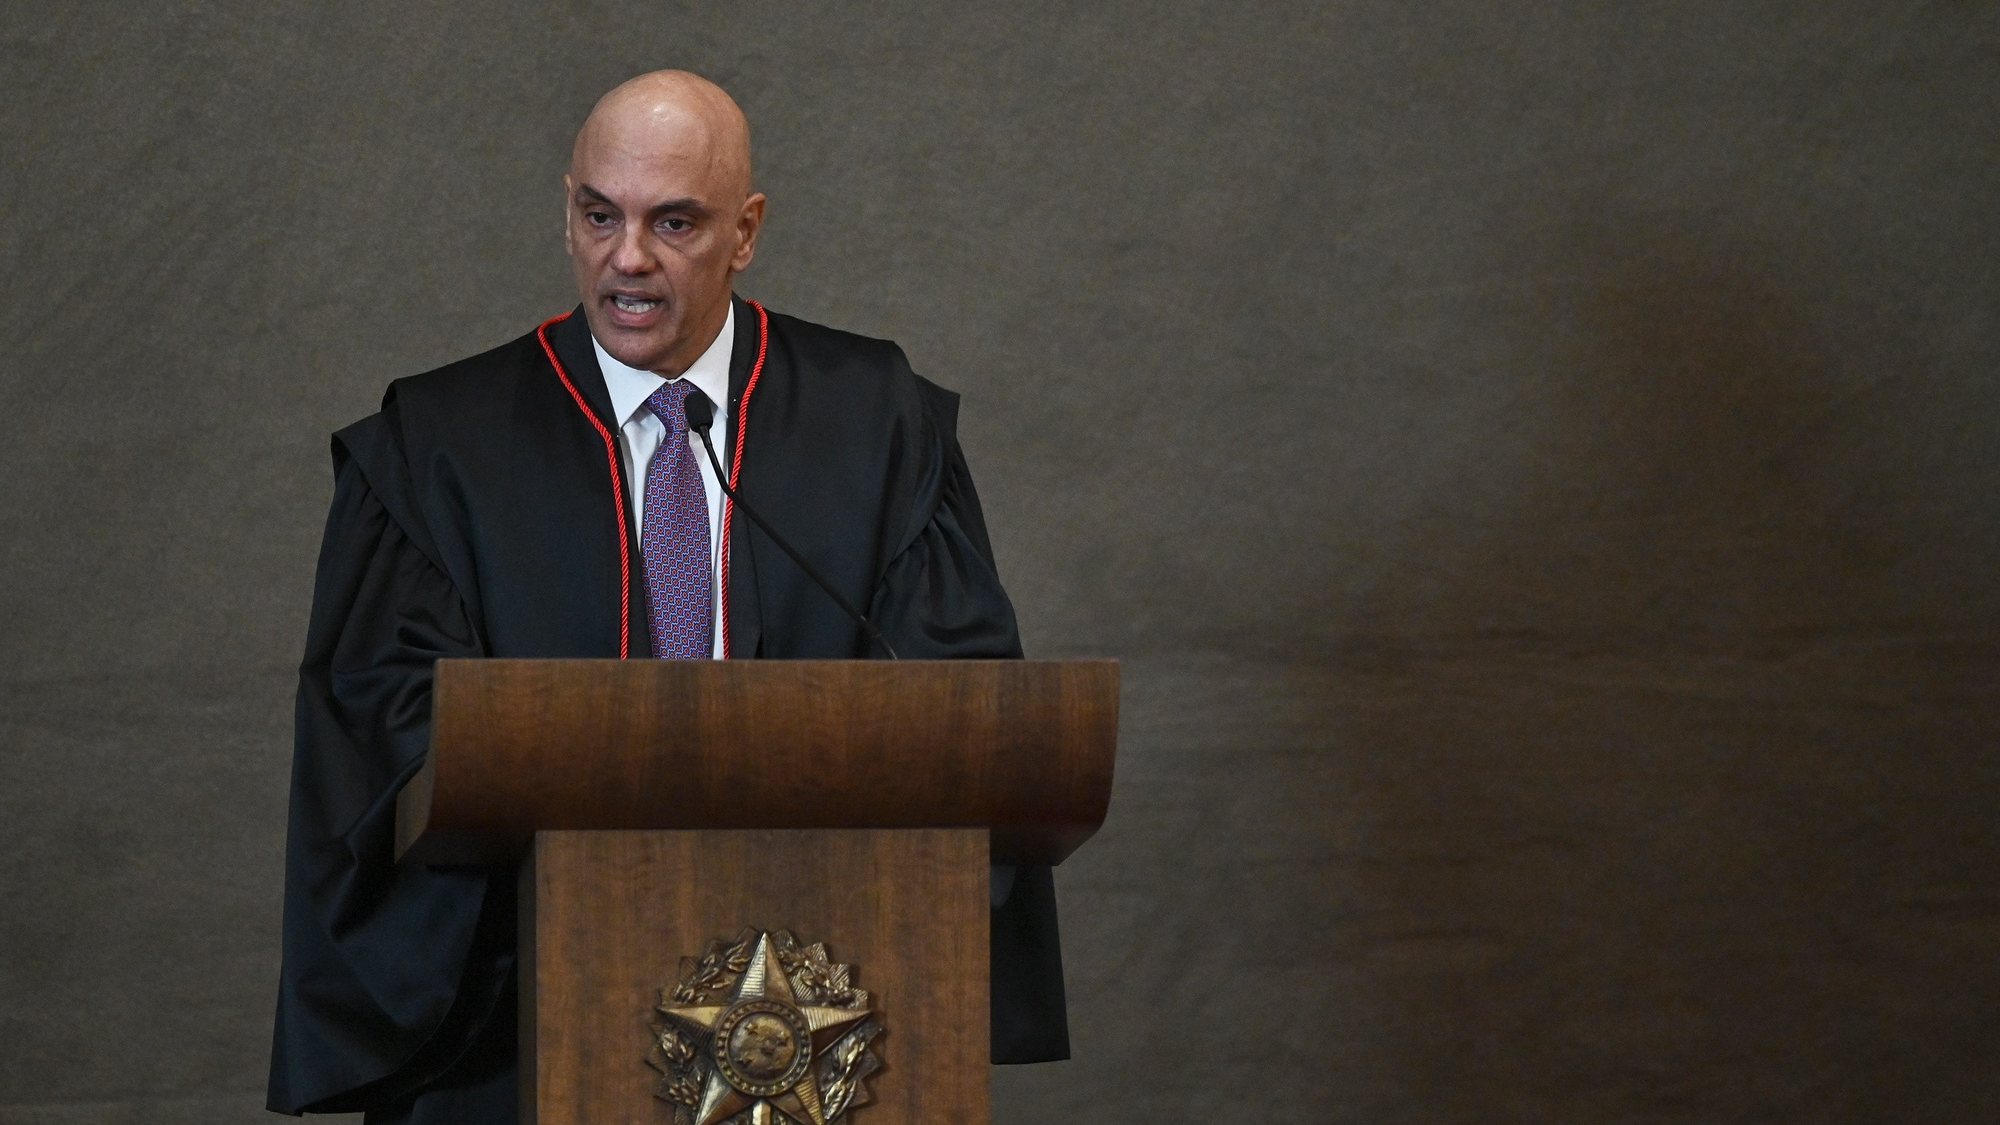 epa10362497 The president of the Superior Electoral Tribunal Alexandre de Moraes speaks during the presidential diploma delivery ceremony at the Superior Electoral Tribunal, in Brasilia, Brazil, 12 December 2022.  EPA/ANDRE BORGES